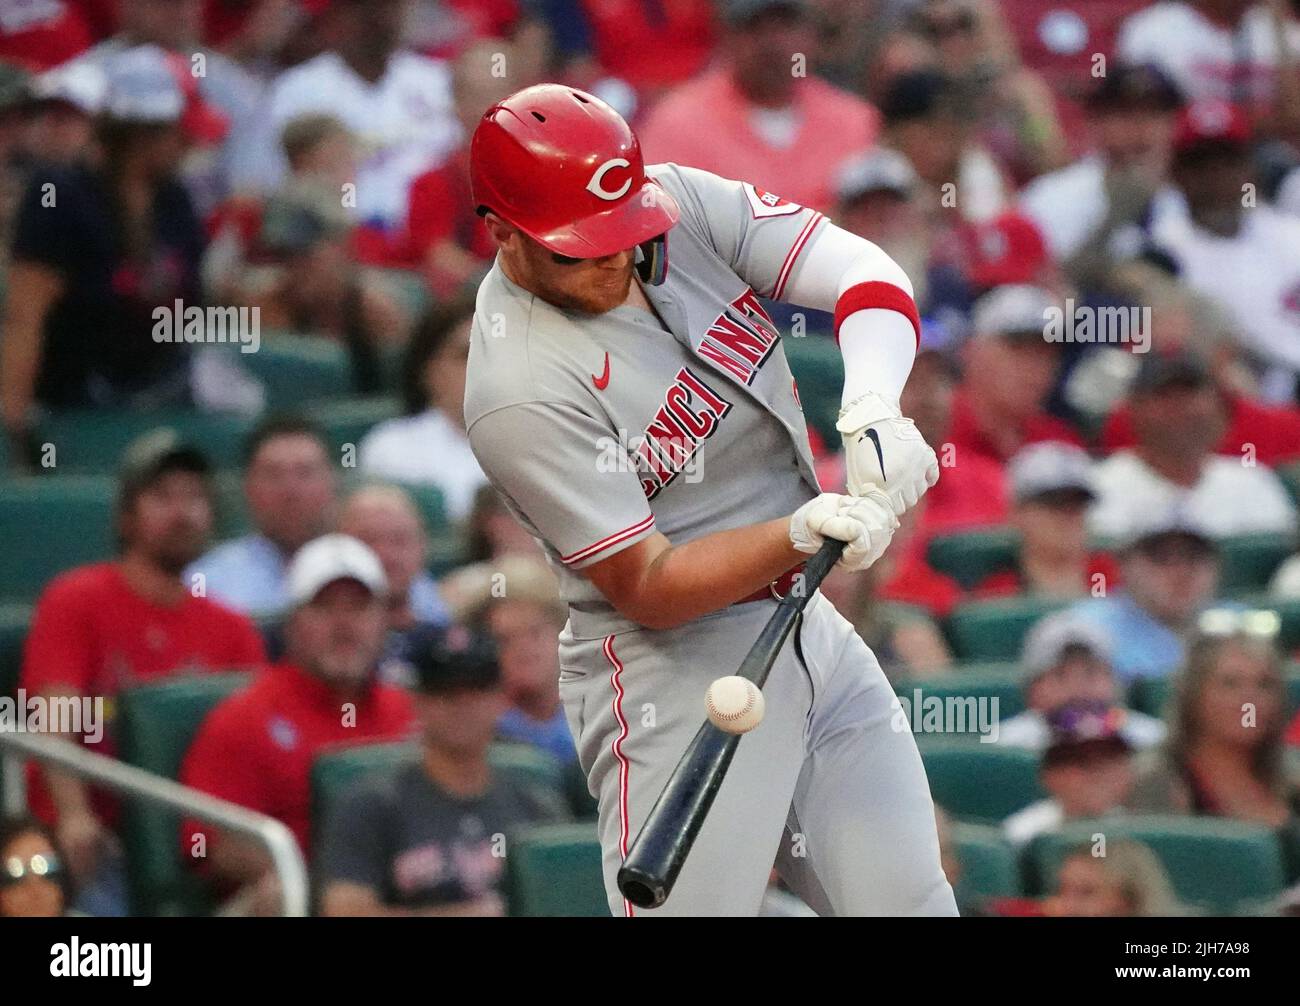 St. Louis, United States. 16th July, 2022. Cincinnati Reds Brandon Drury connects on a ball good for a single in the first inning against the St. Louis Cardinals at Busch Stadium in St. Louis on Friday, July 15, 2022. Photo by Bill Greenblatt/UPI Credit: UPI/Alamy Live News Stock Photo